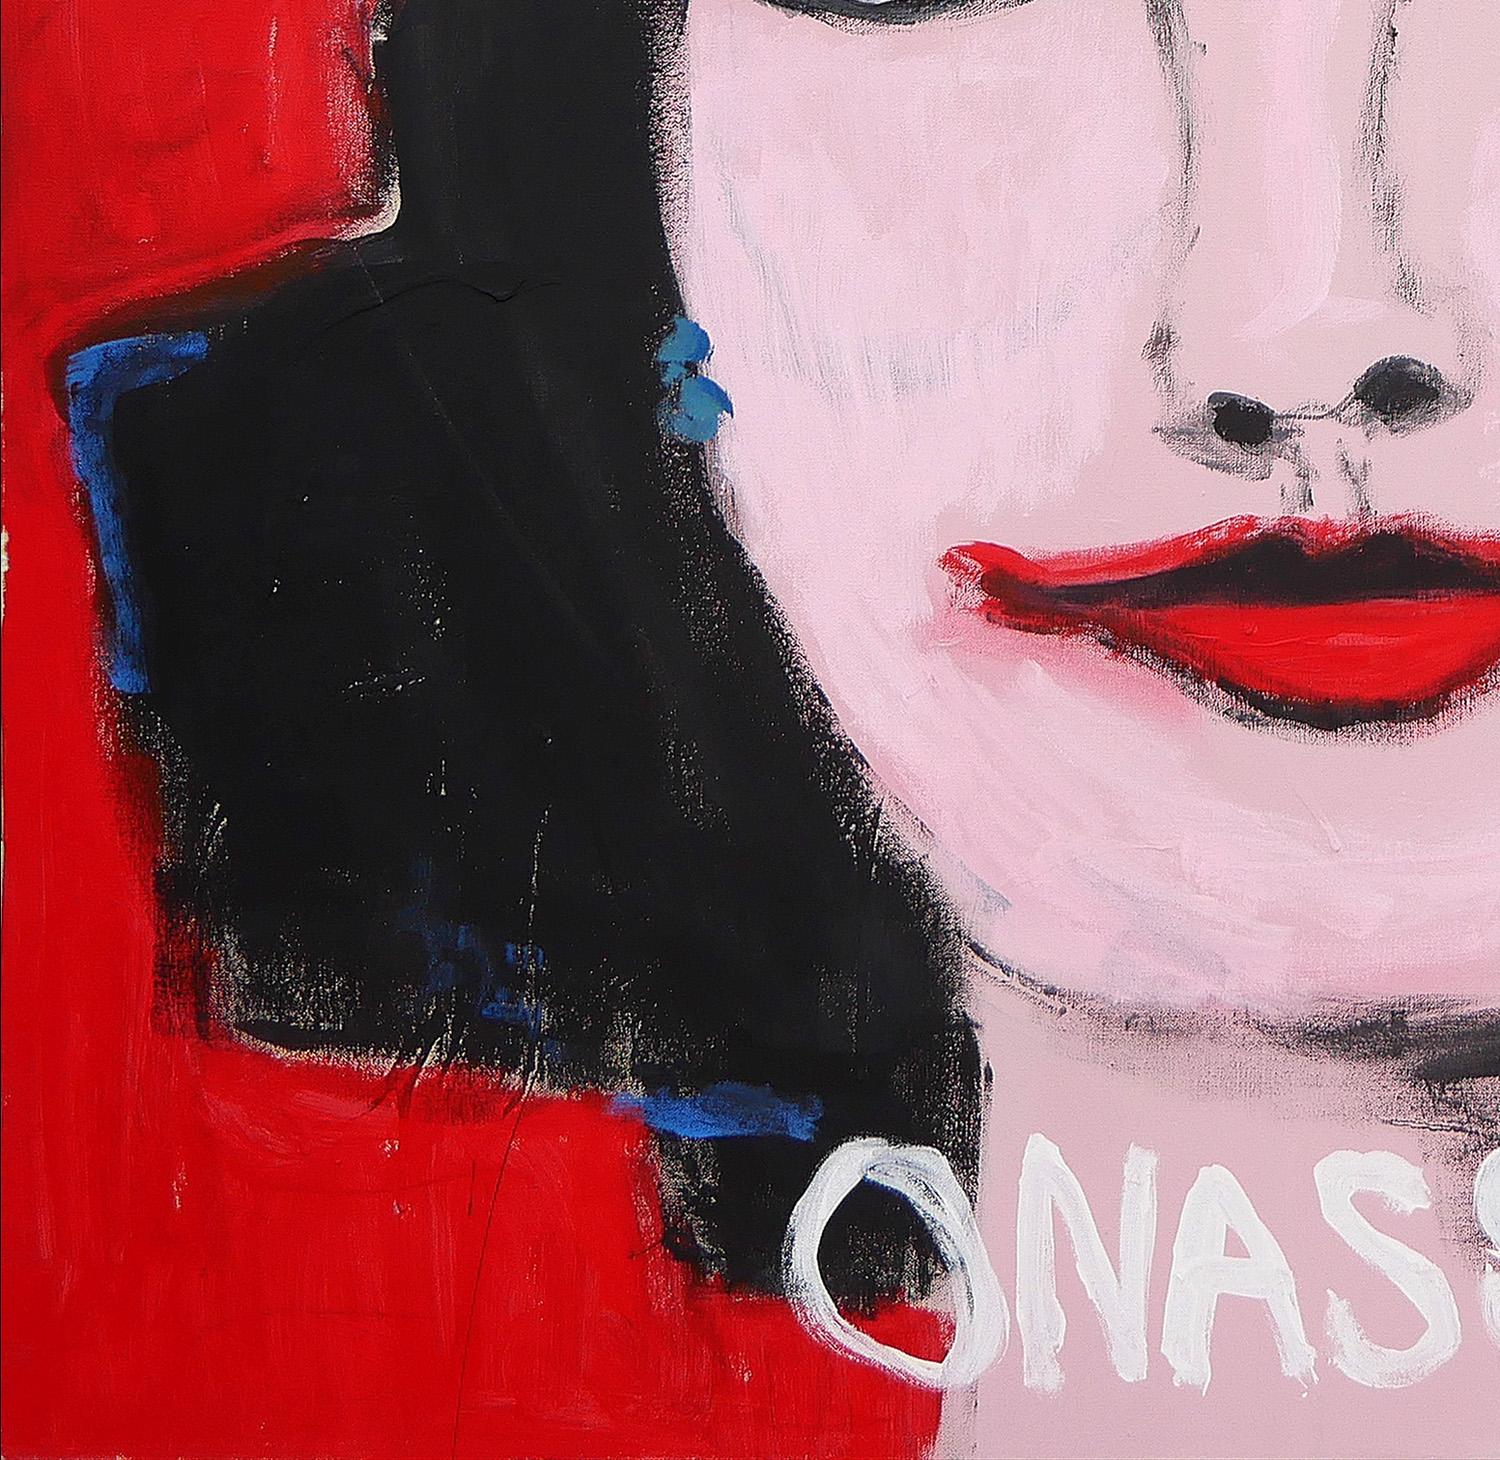 Contemporary pop art painting by Texas / Mexico-based artist Tyler Casey. The work features an abstract painting of former First Lady Jackie Kennedy against a bright red background with her name 